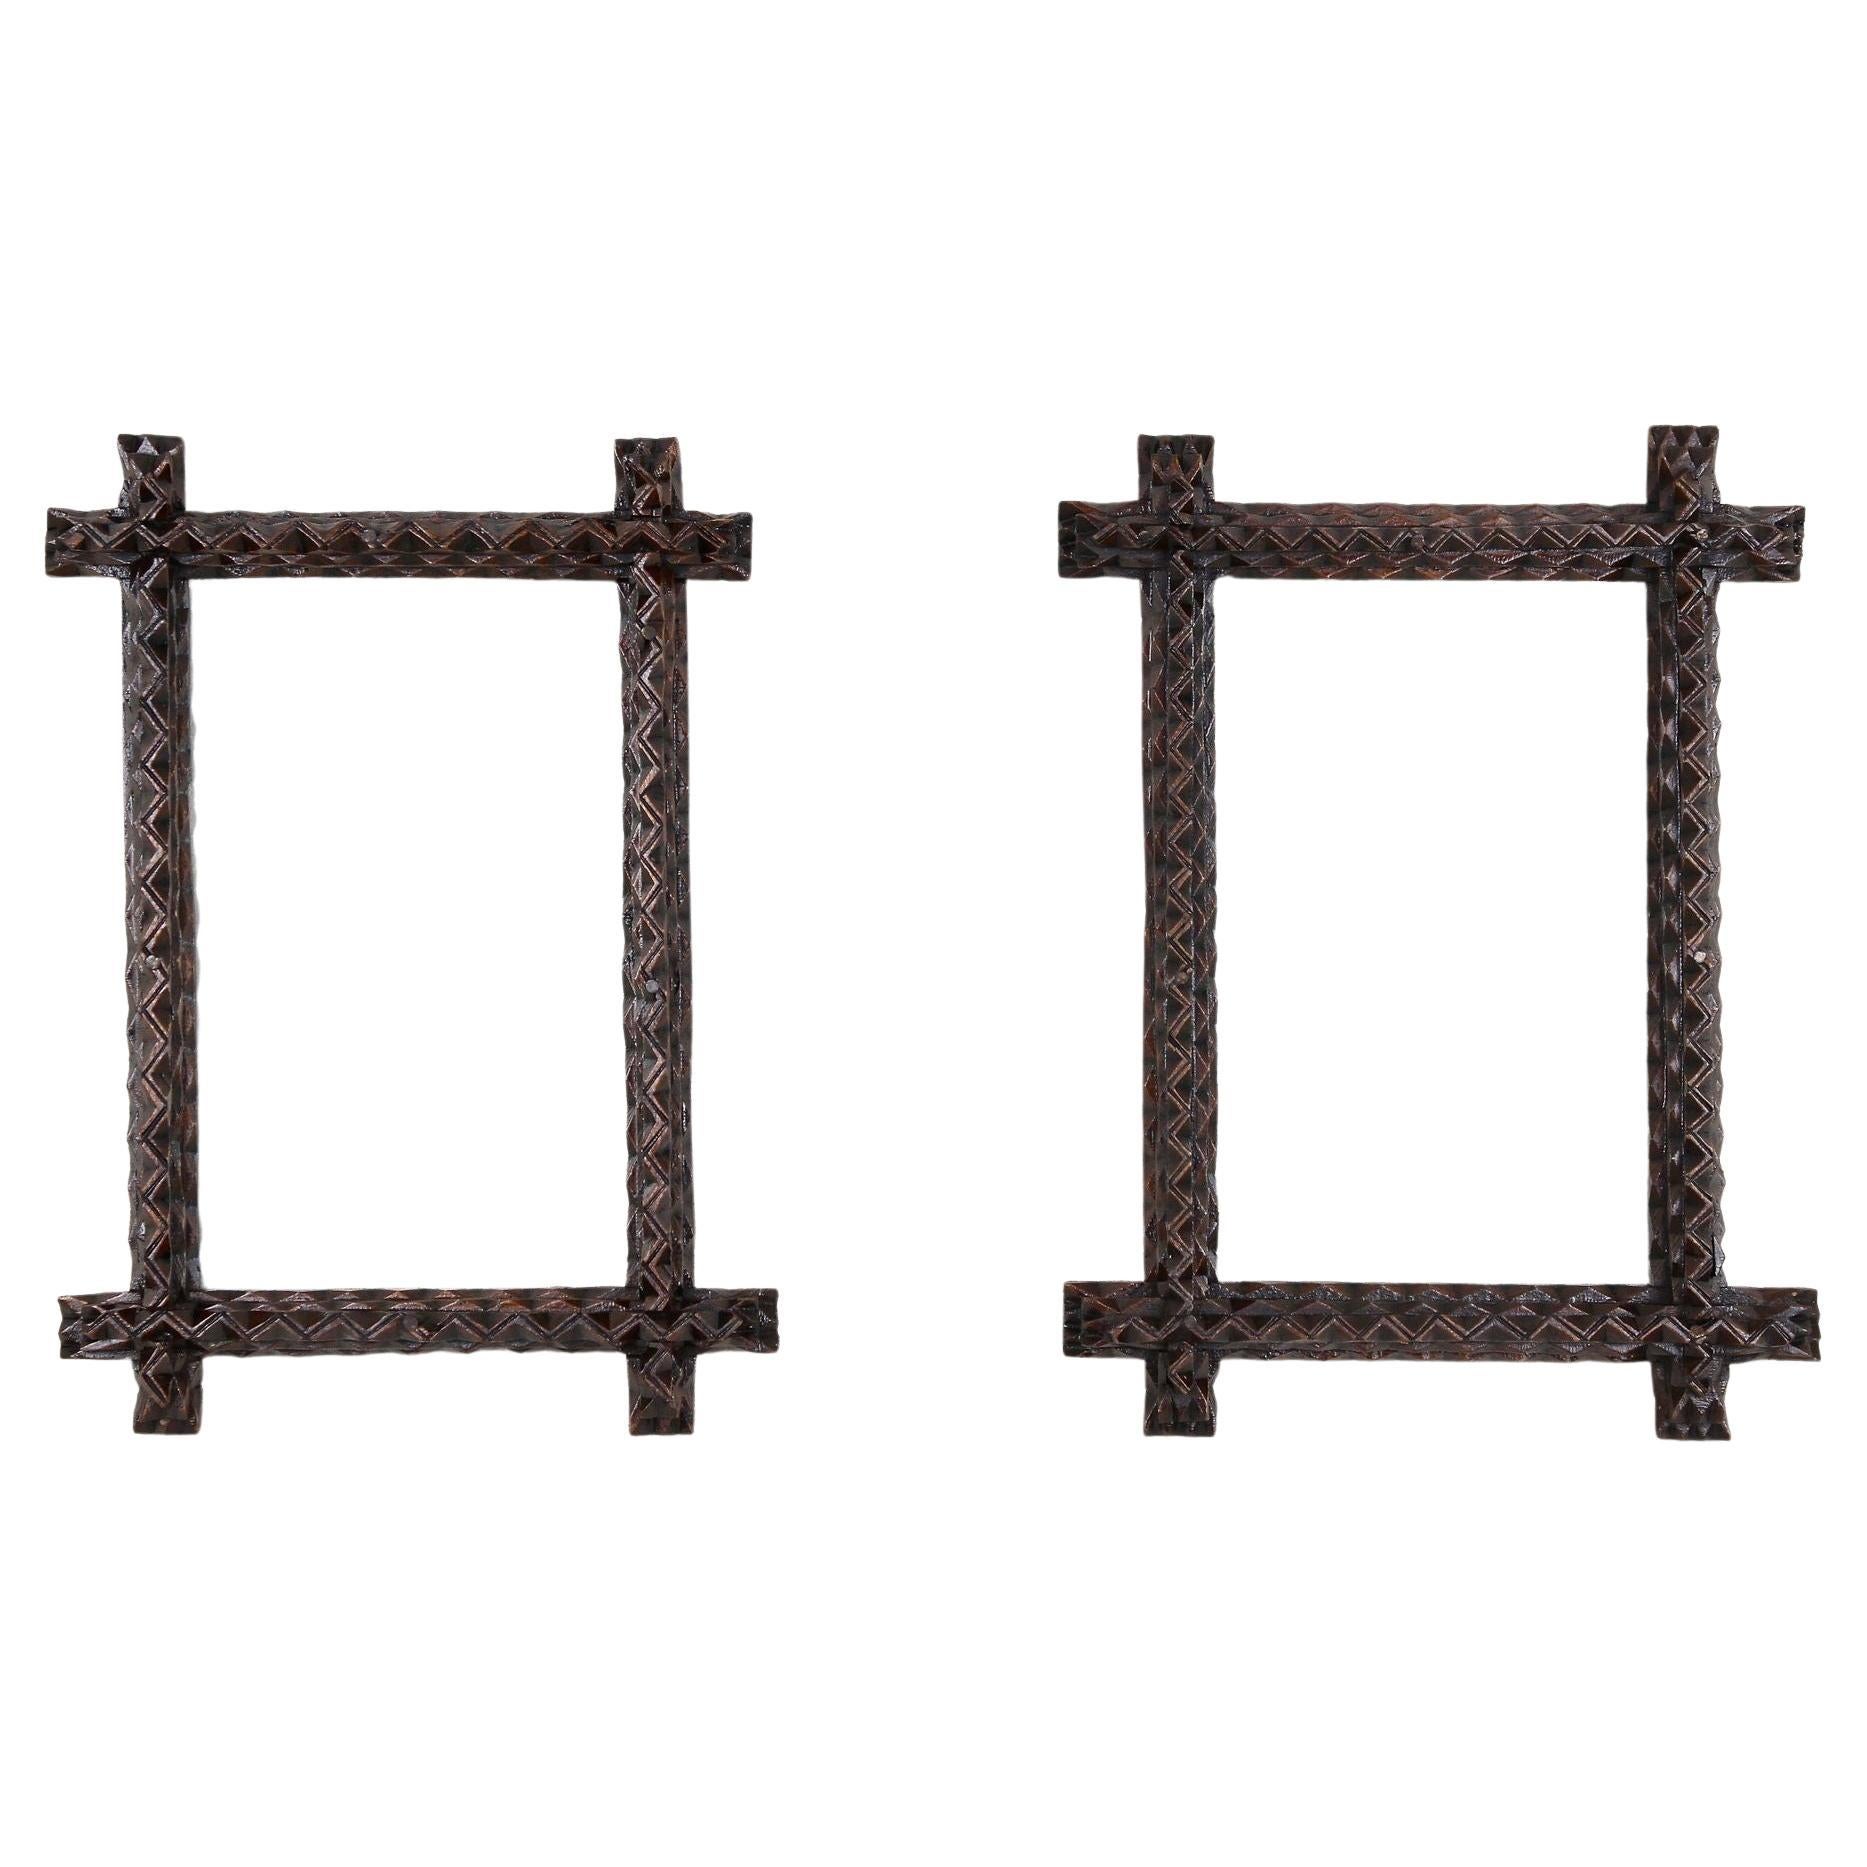 Pair of 19th Century Tramp Art Photo Frames Hand Carved, Austria circa 1880 For Sale